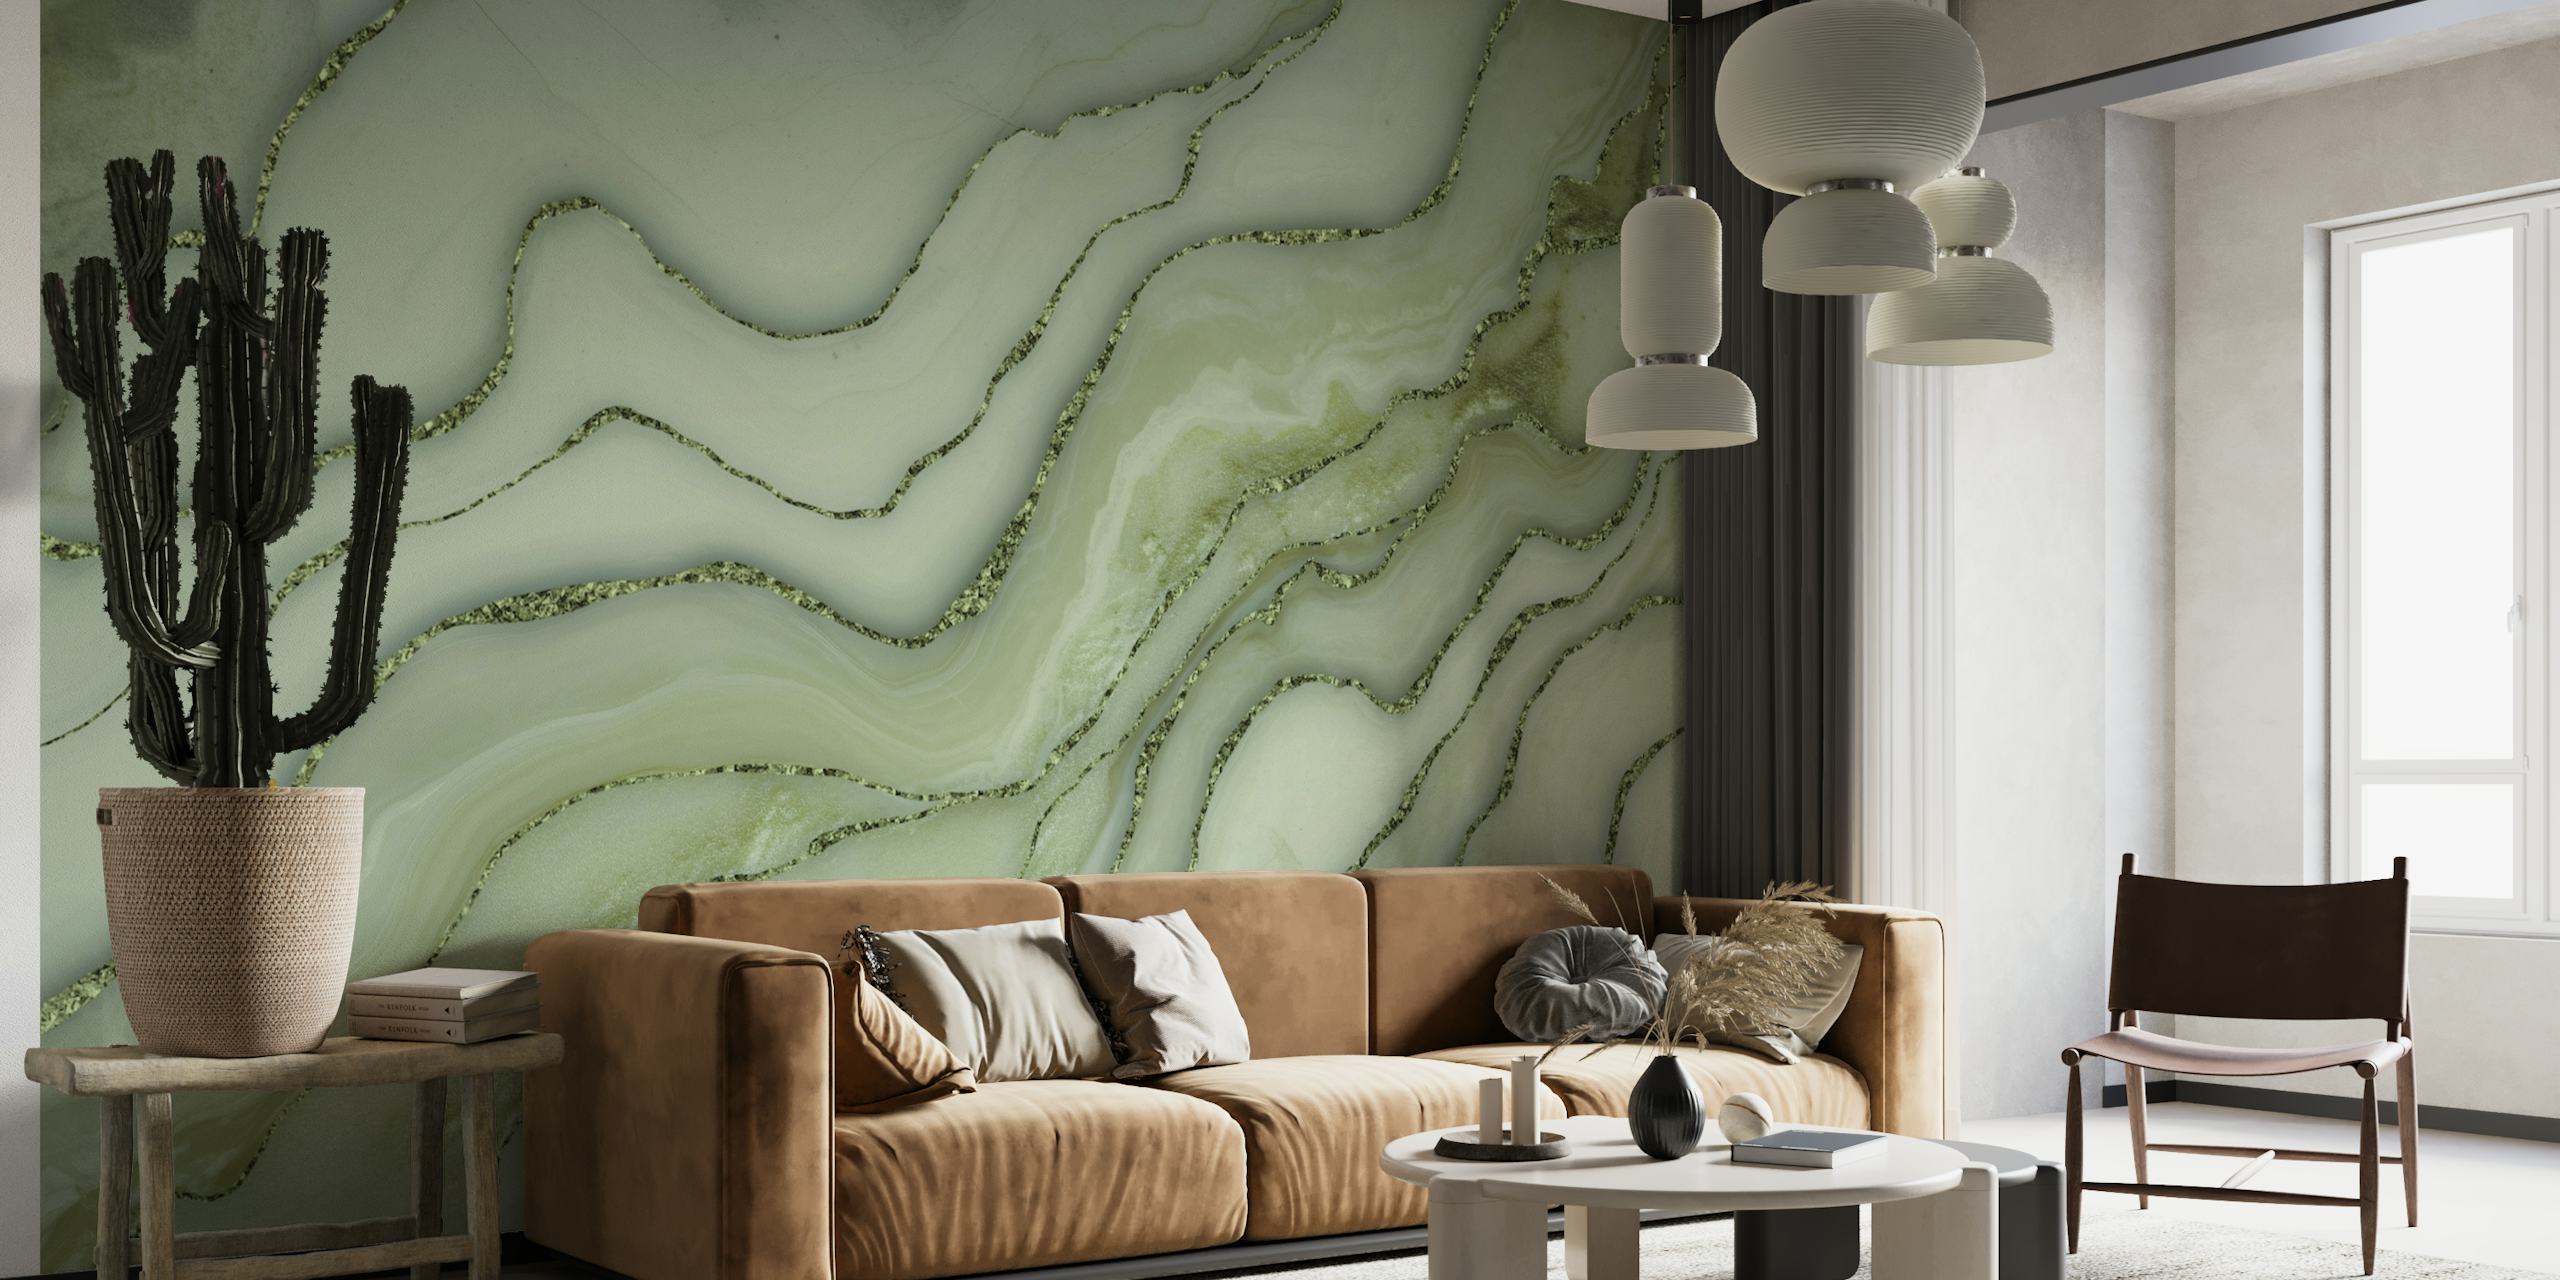 Jade green marble wall mural with gold accents